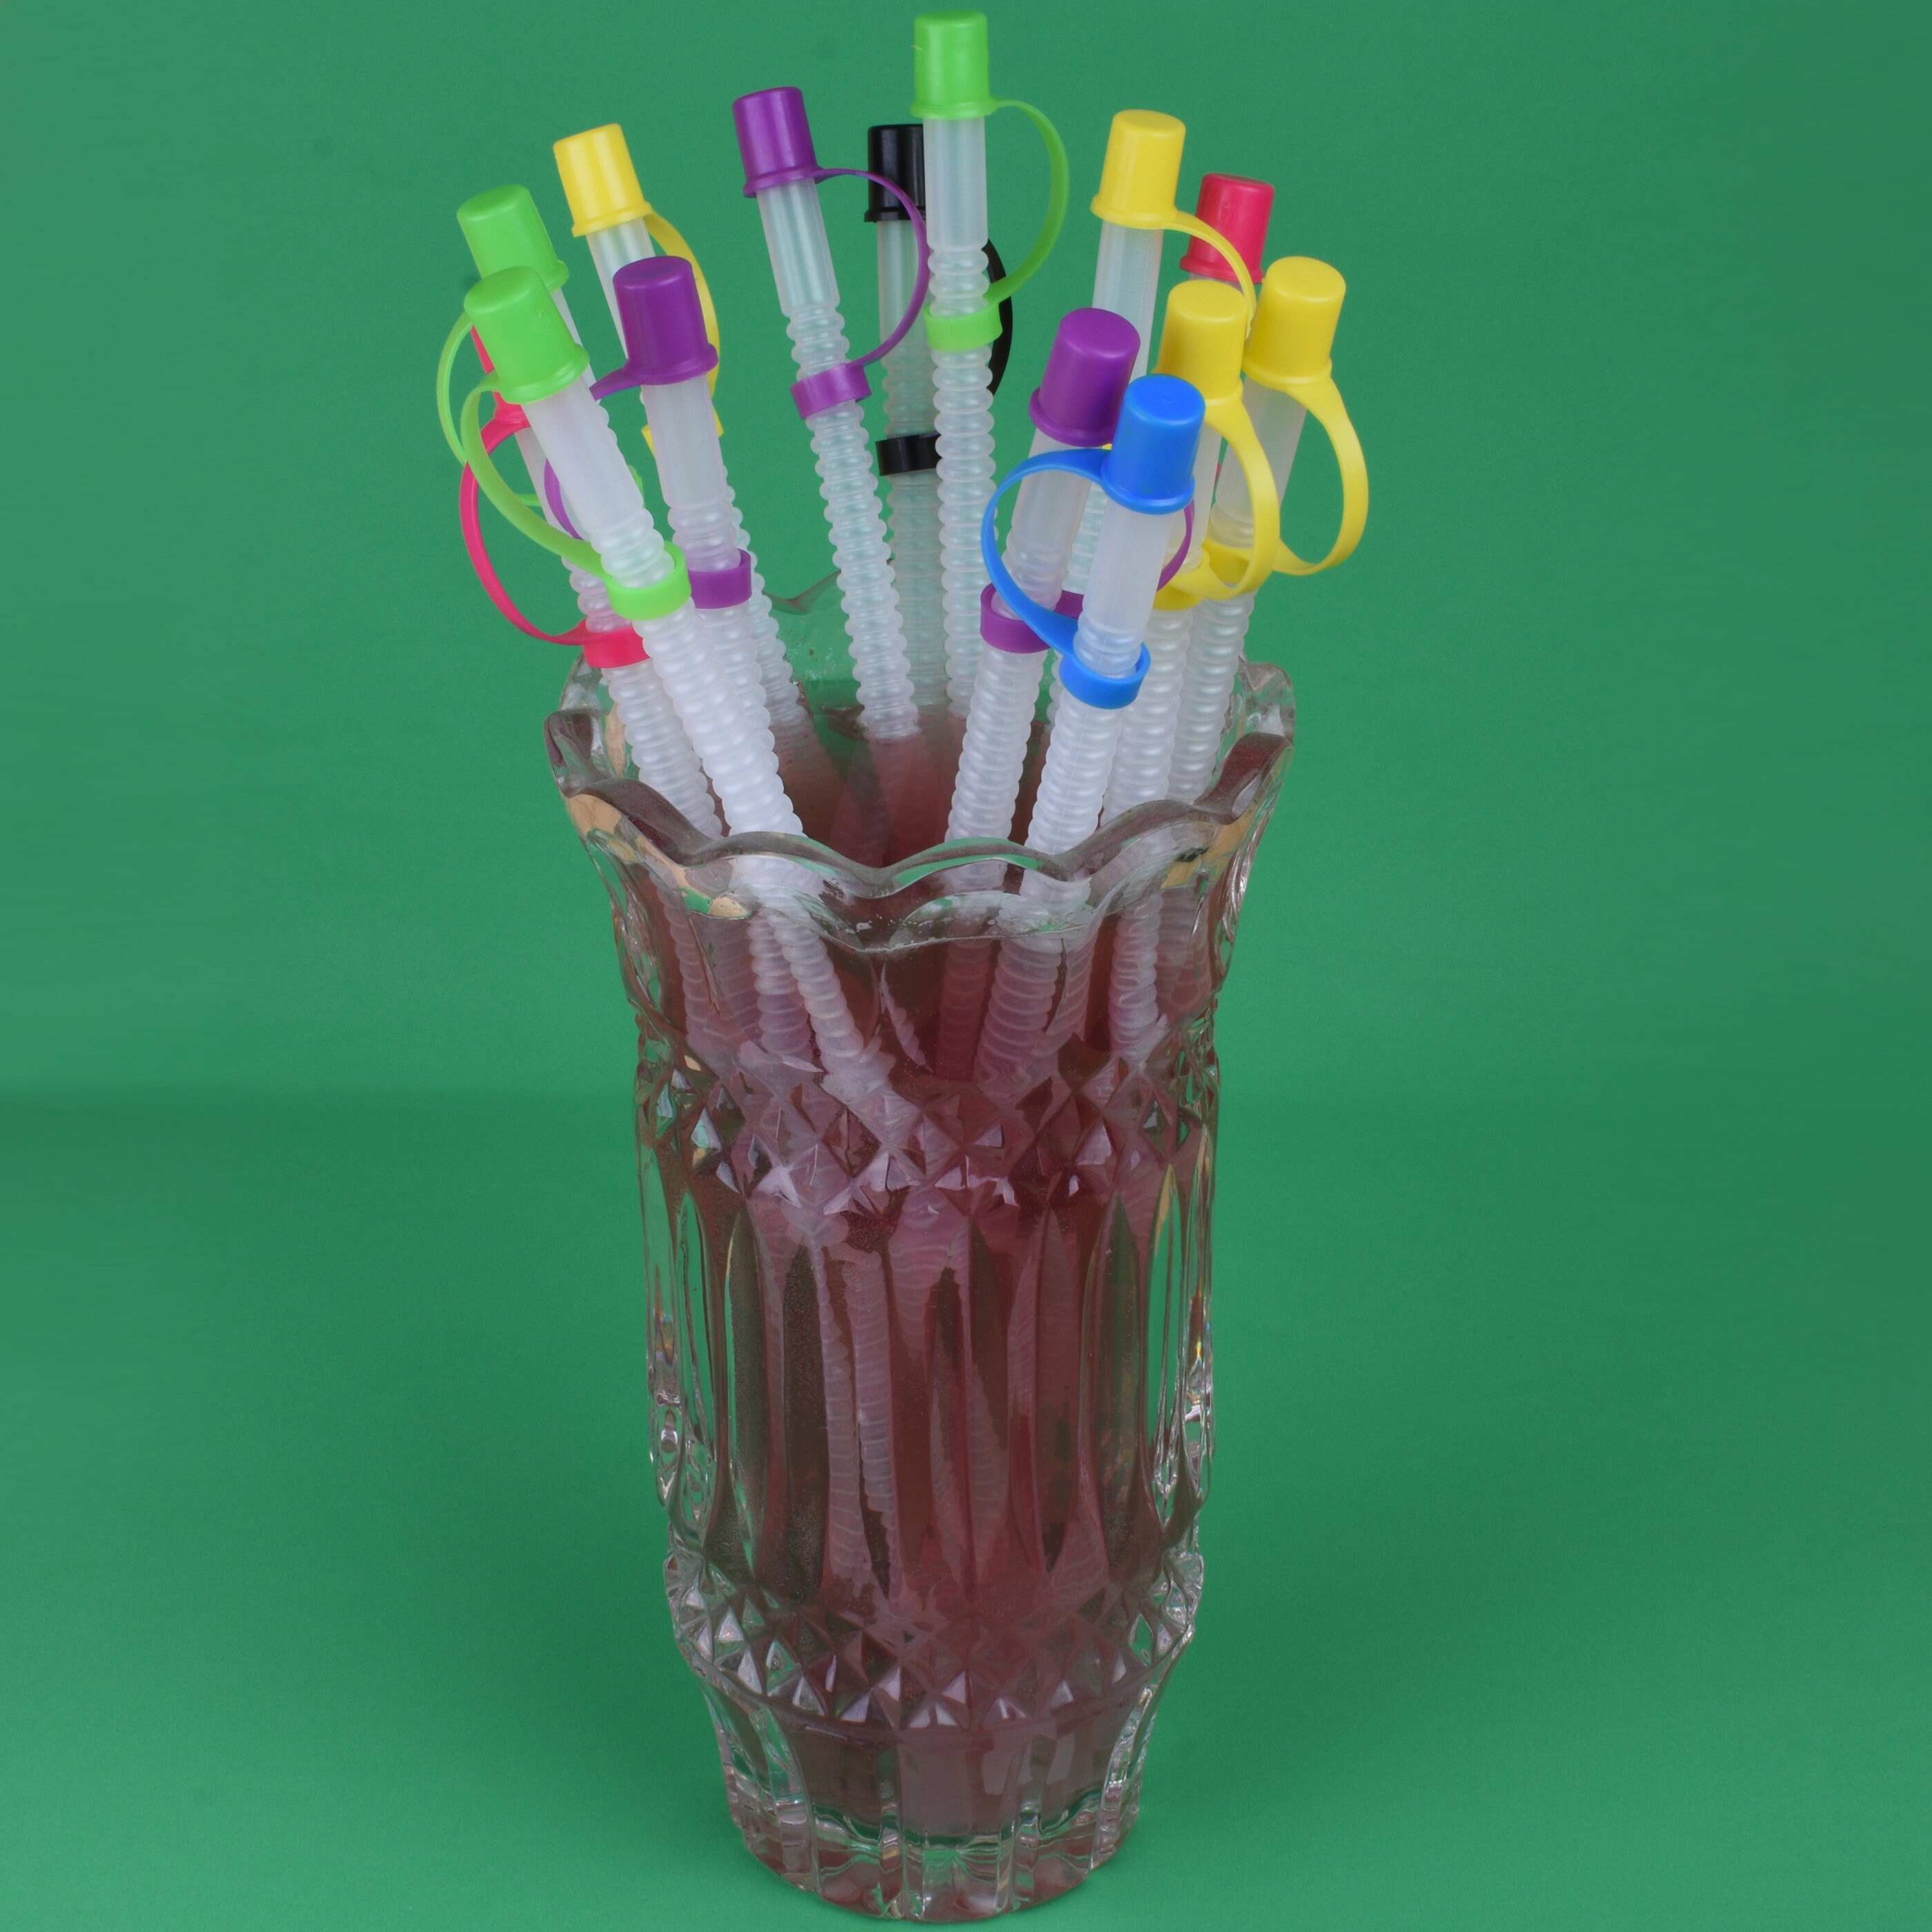 Bendable Straws with Straw Covers Cap - 11 Inch Long Flexible Straws -  Bendy Dri